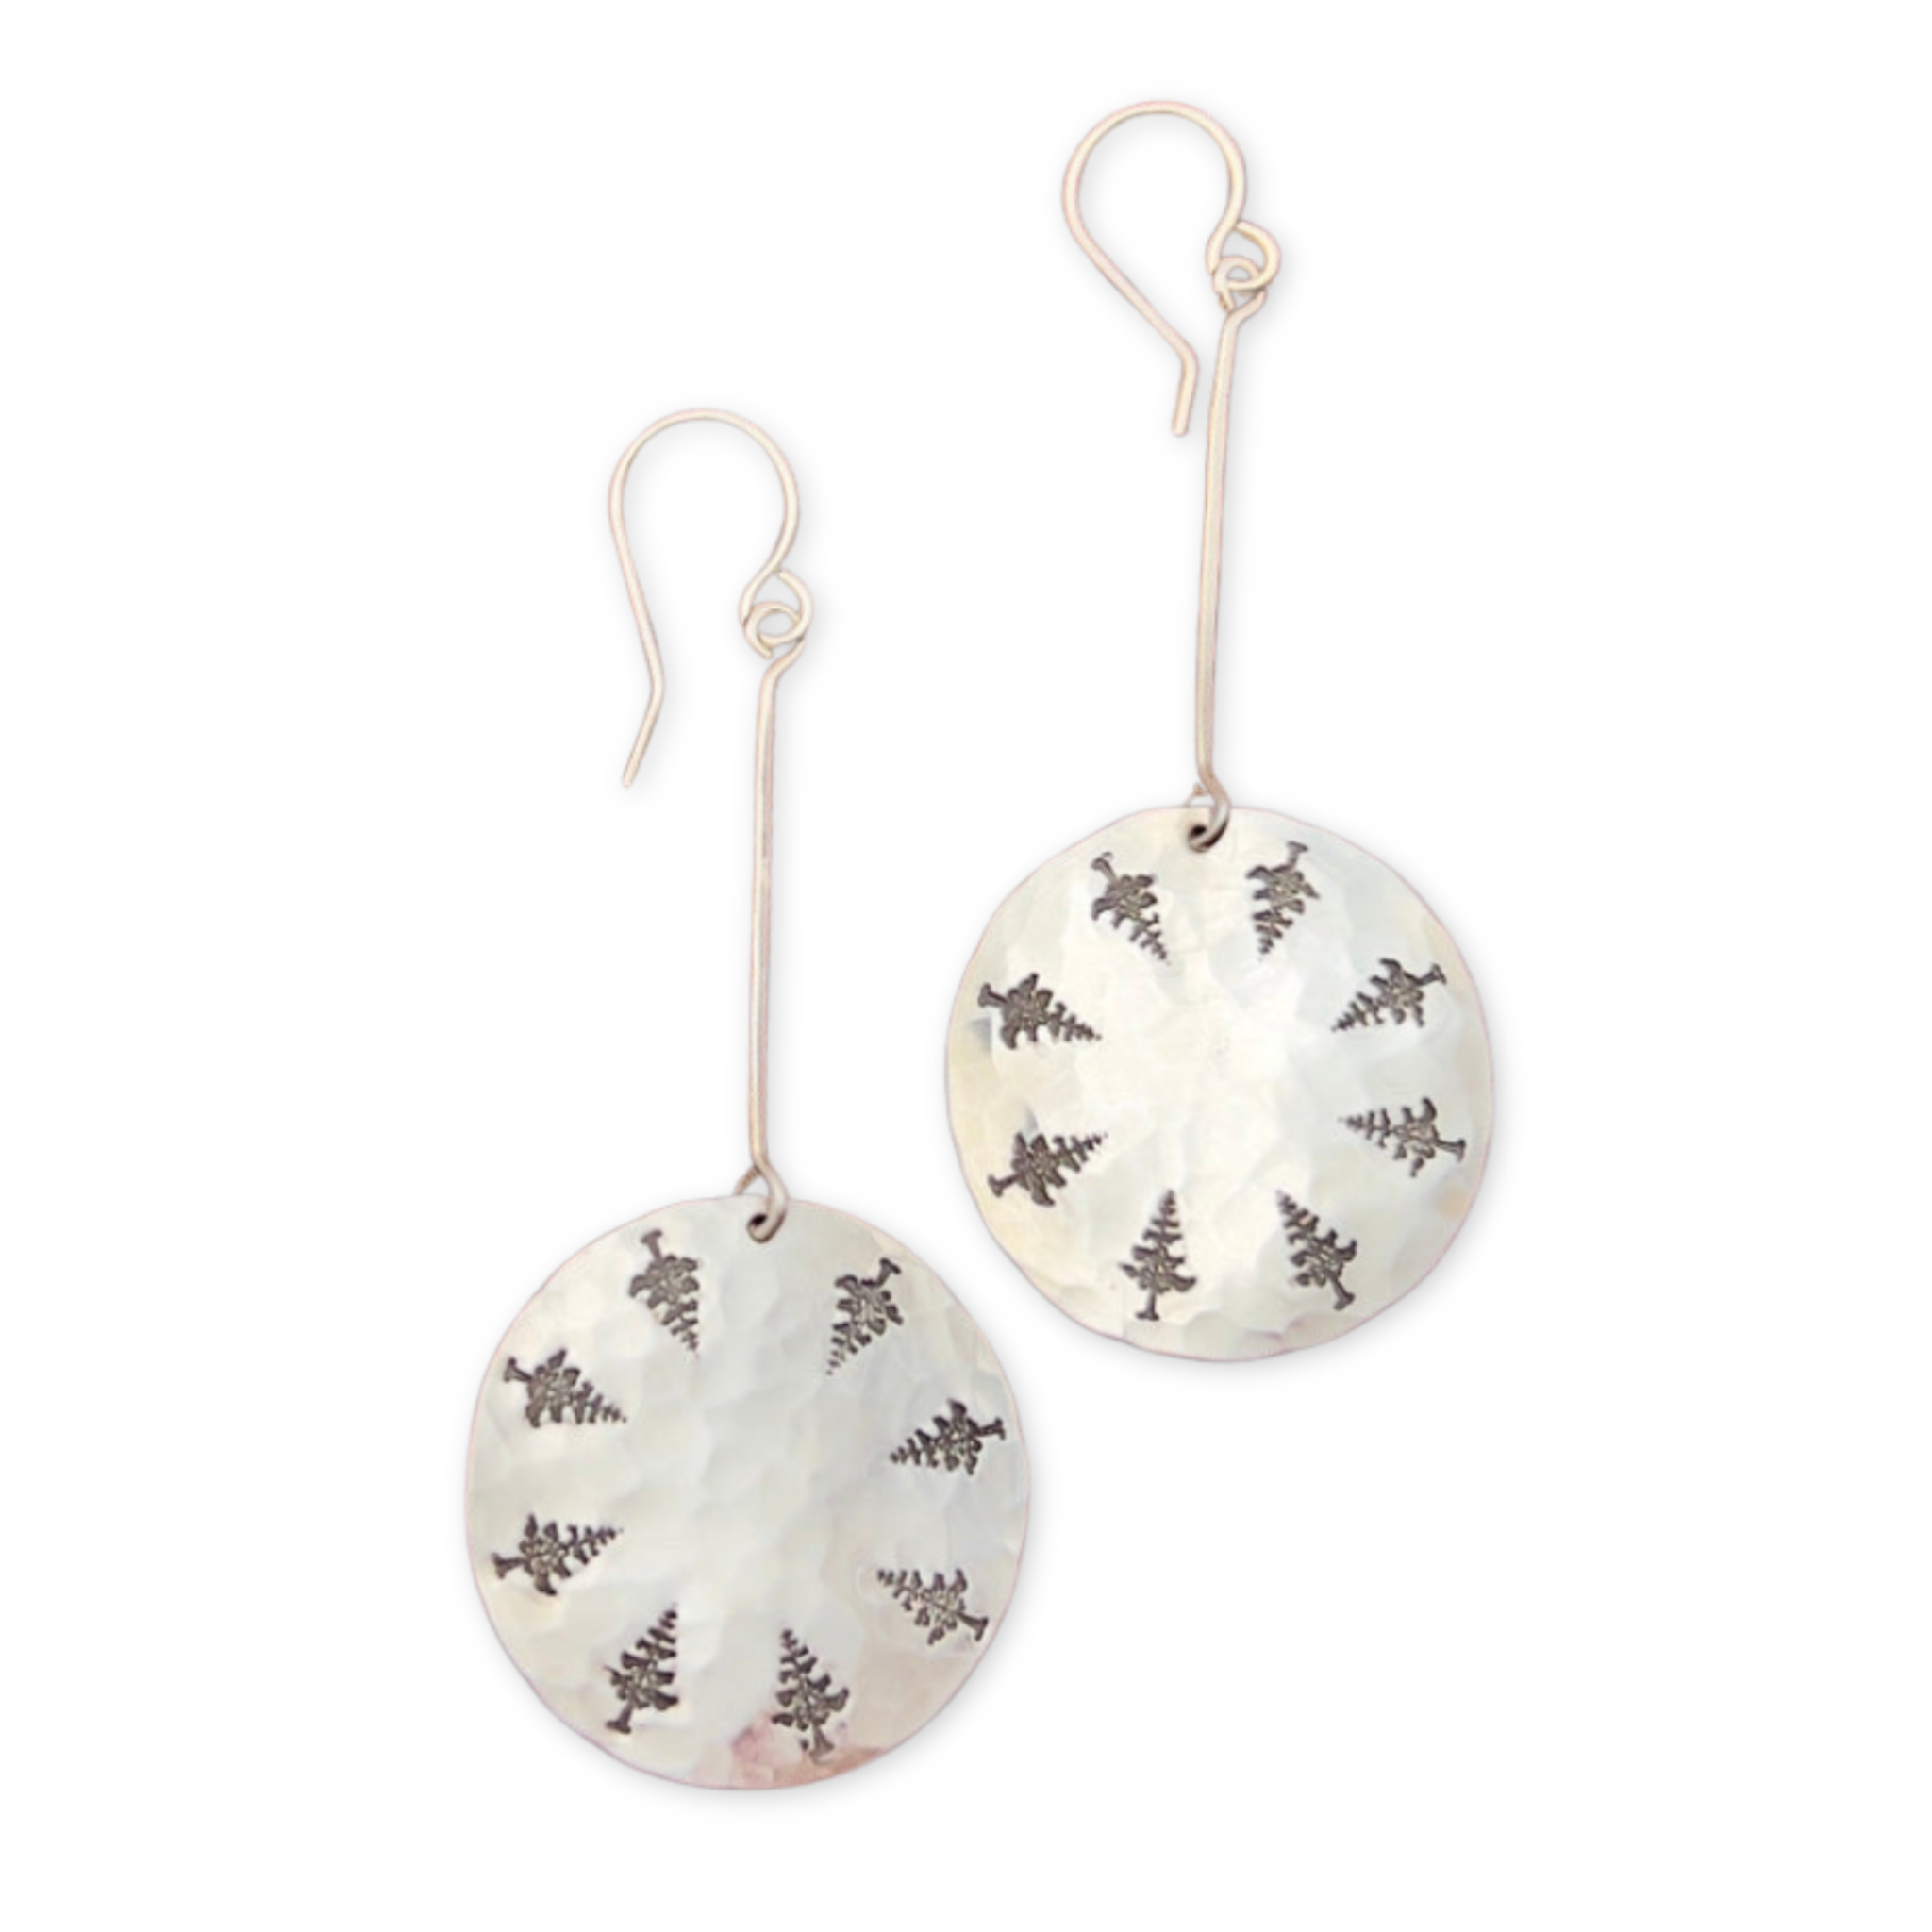 earrings featuring pine trees stamped on round discs hanging from sterling wire 